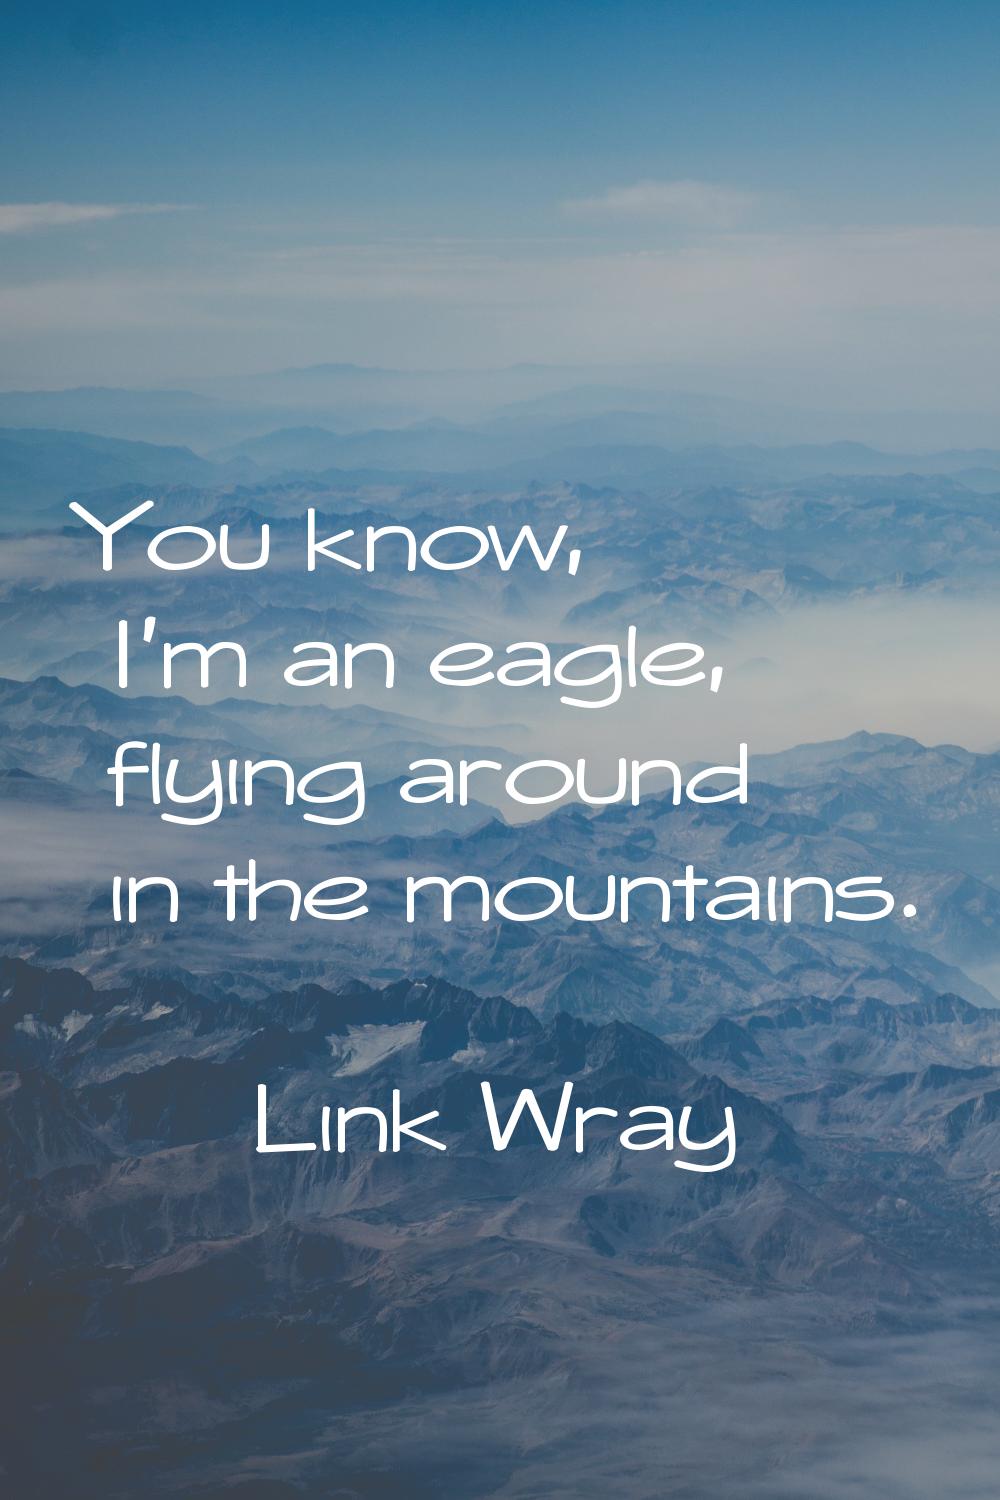 You know, I'm an eagle, flying around in the mountains.